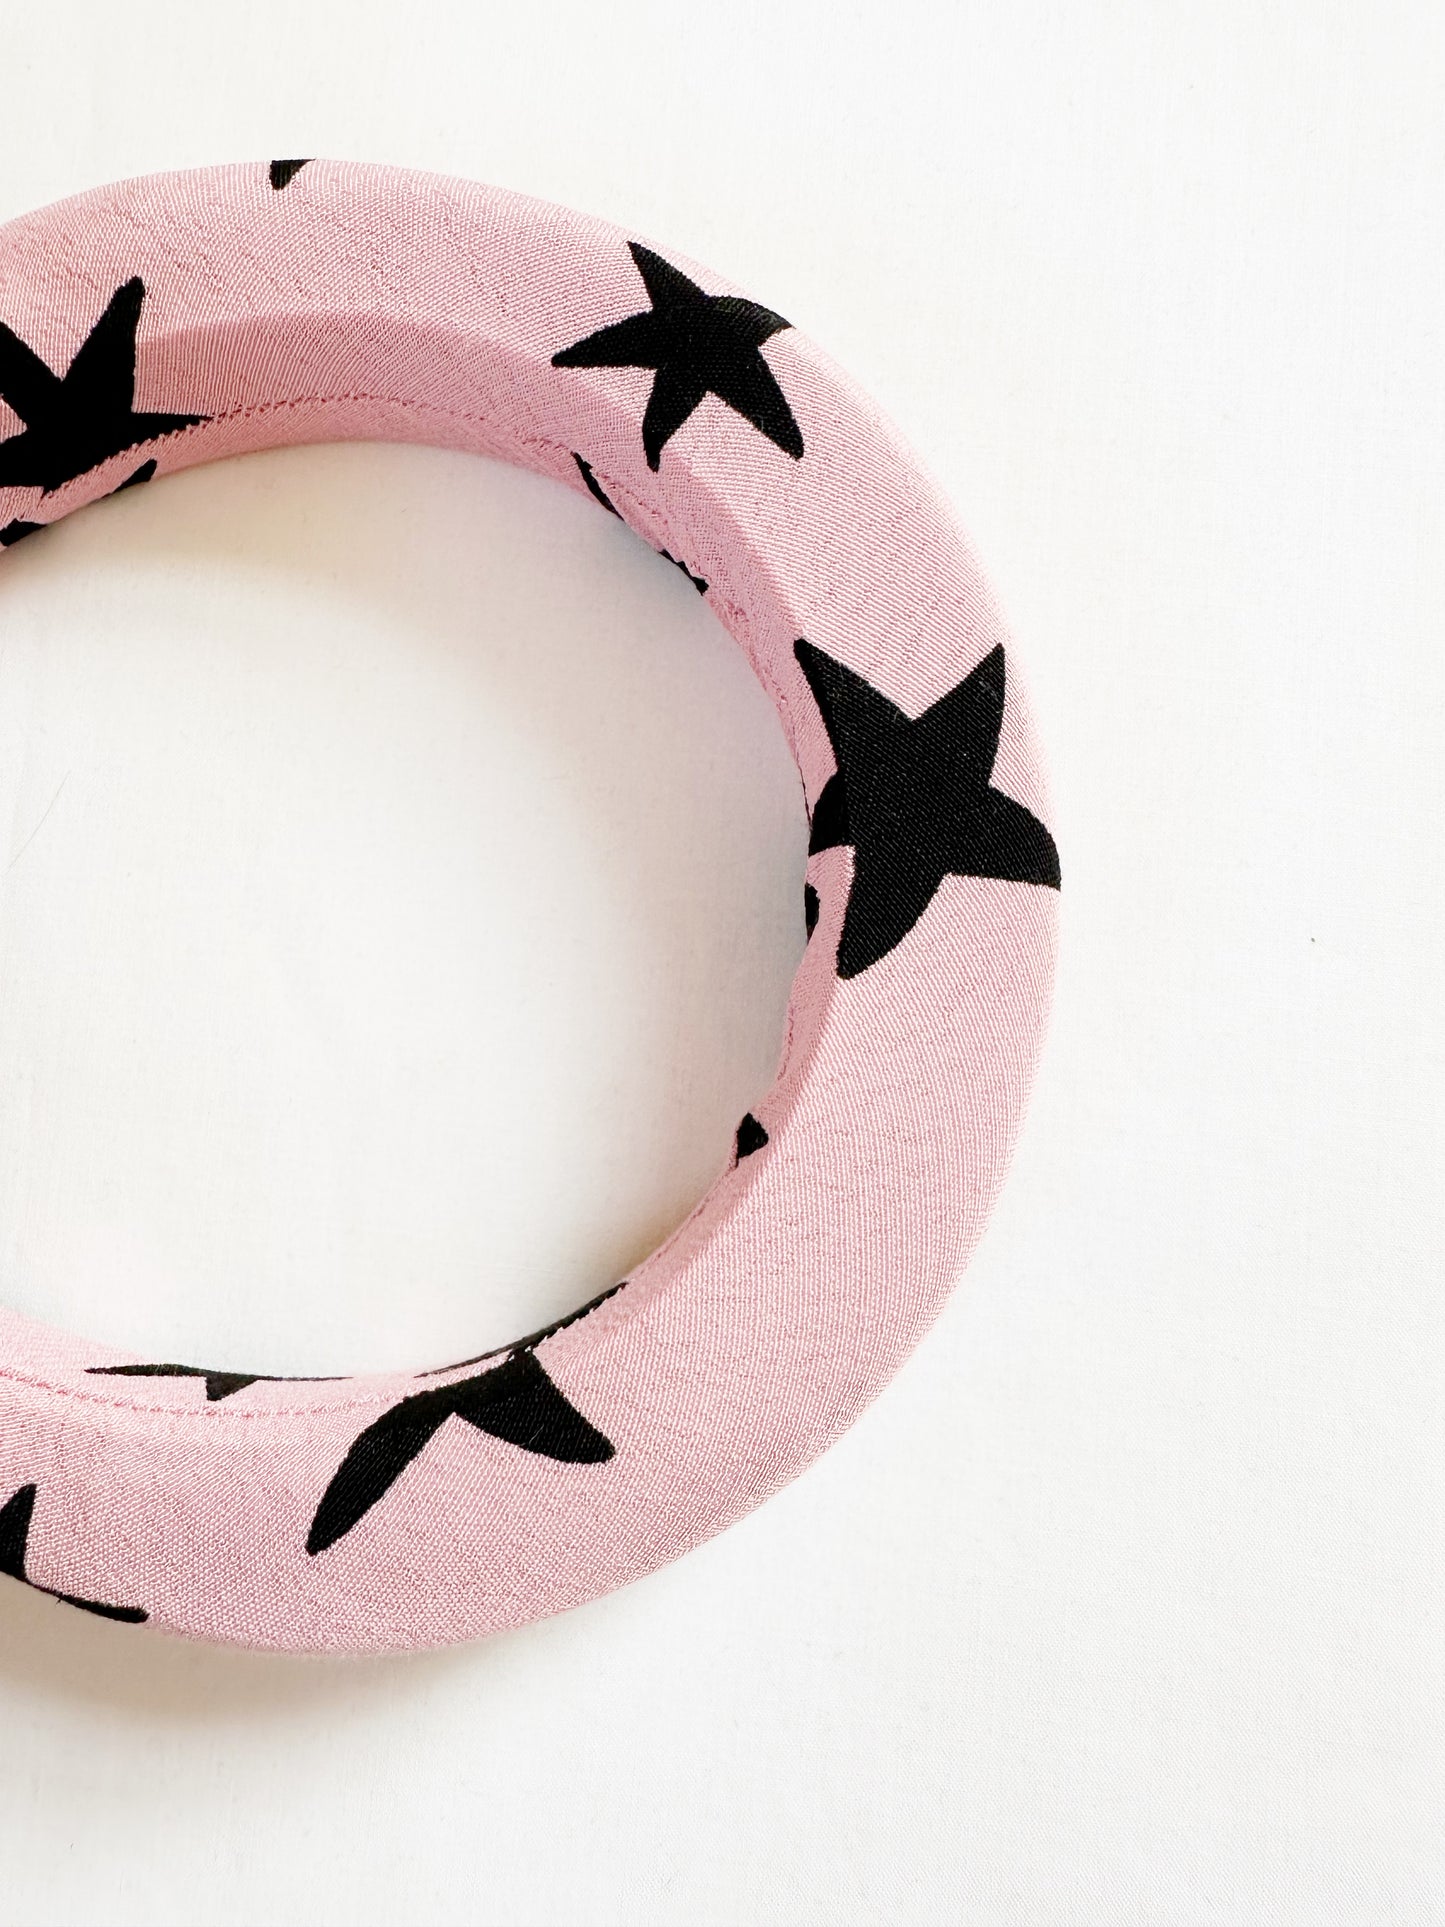 Padded headband in pink and black star print.